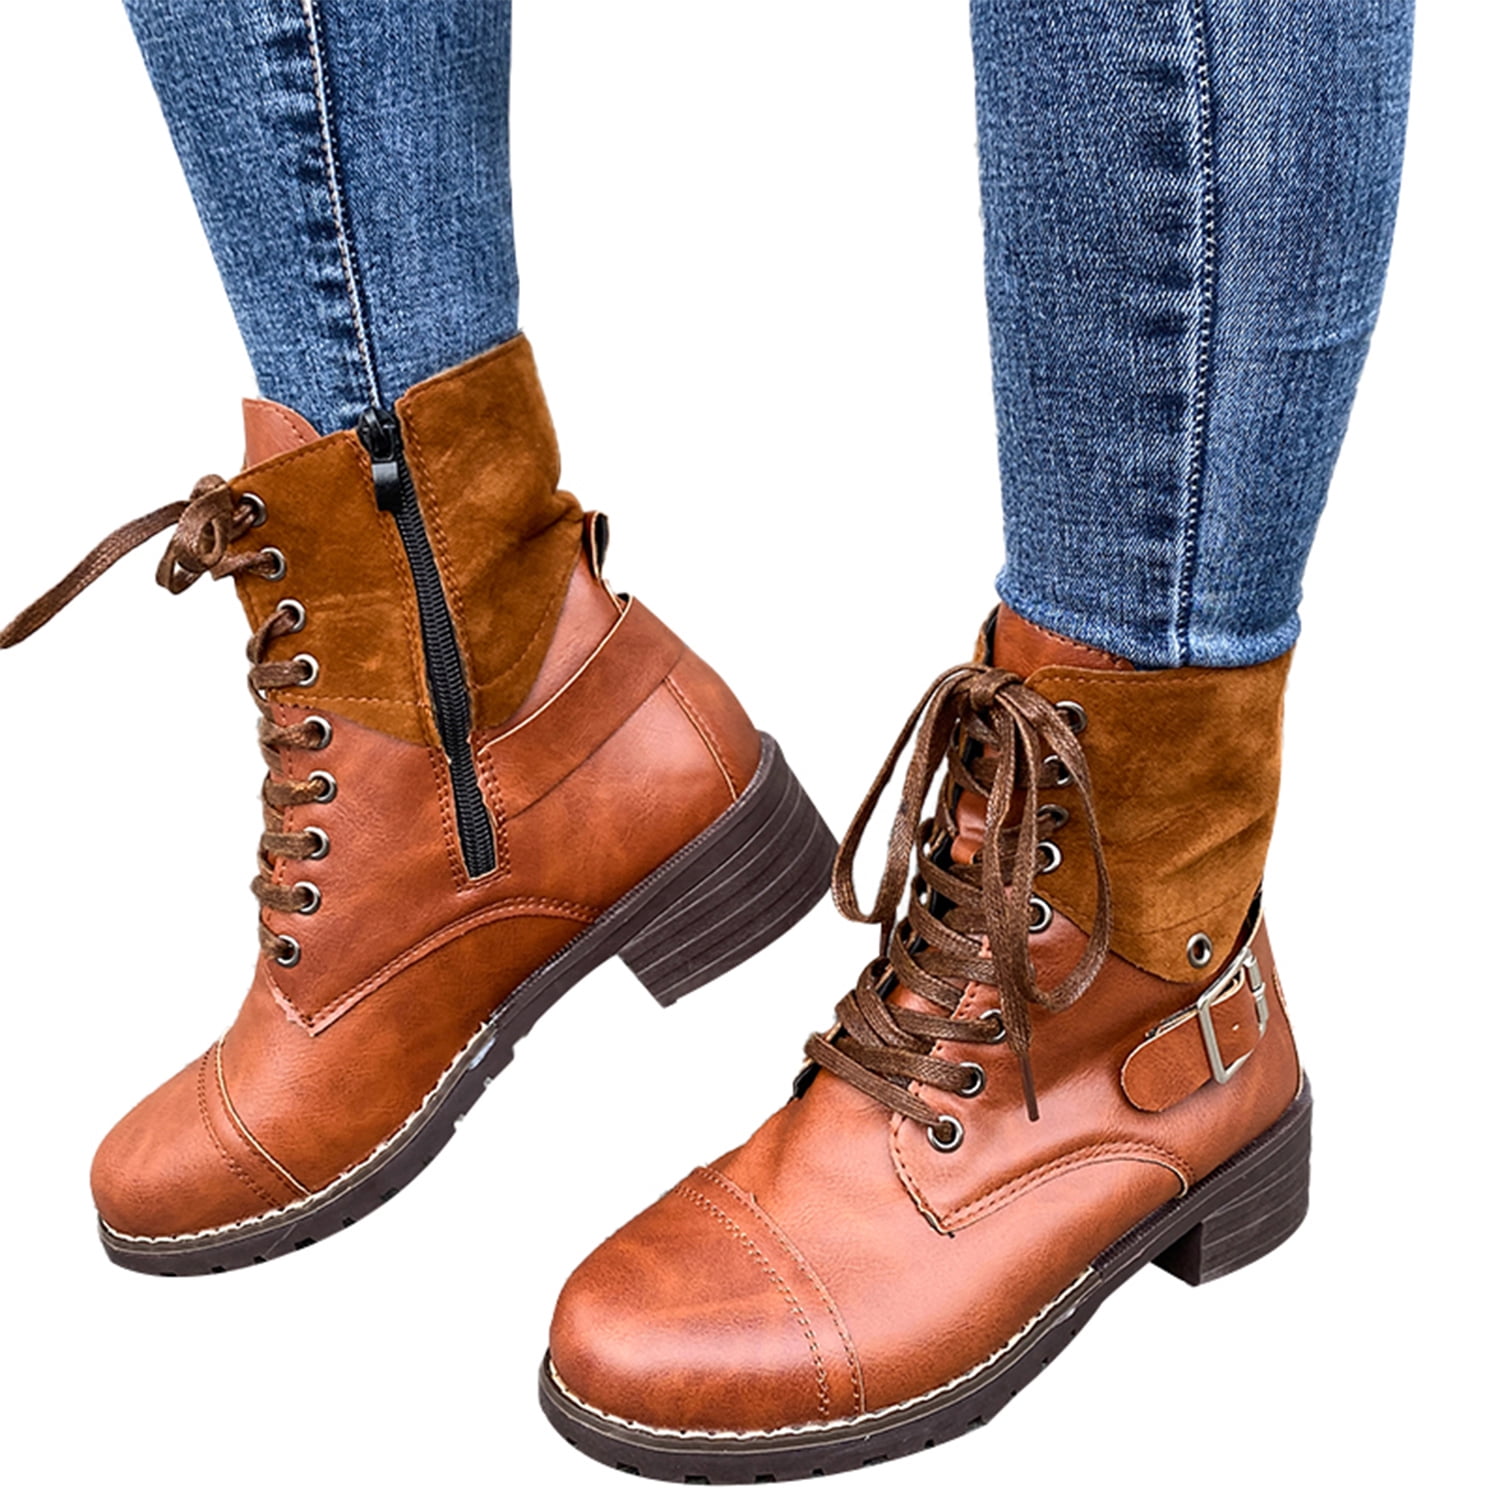 Details about   Women's Army Military Lace Up Round Toe Combat Mid Calf Boots 41/42/43 Outwear 